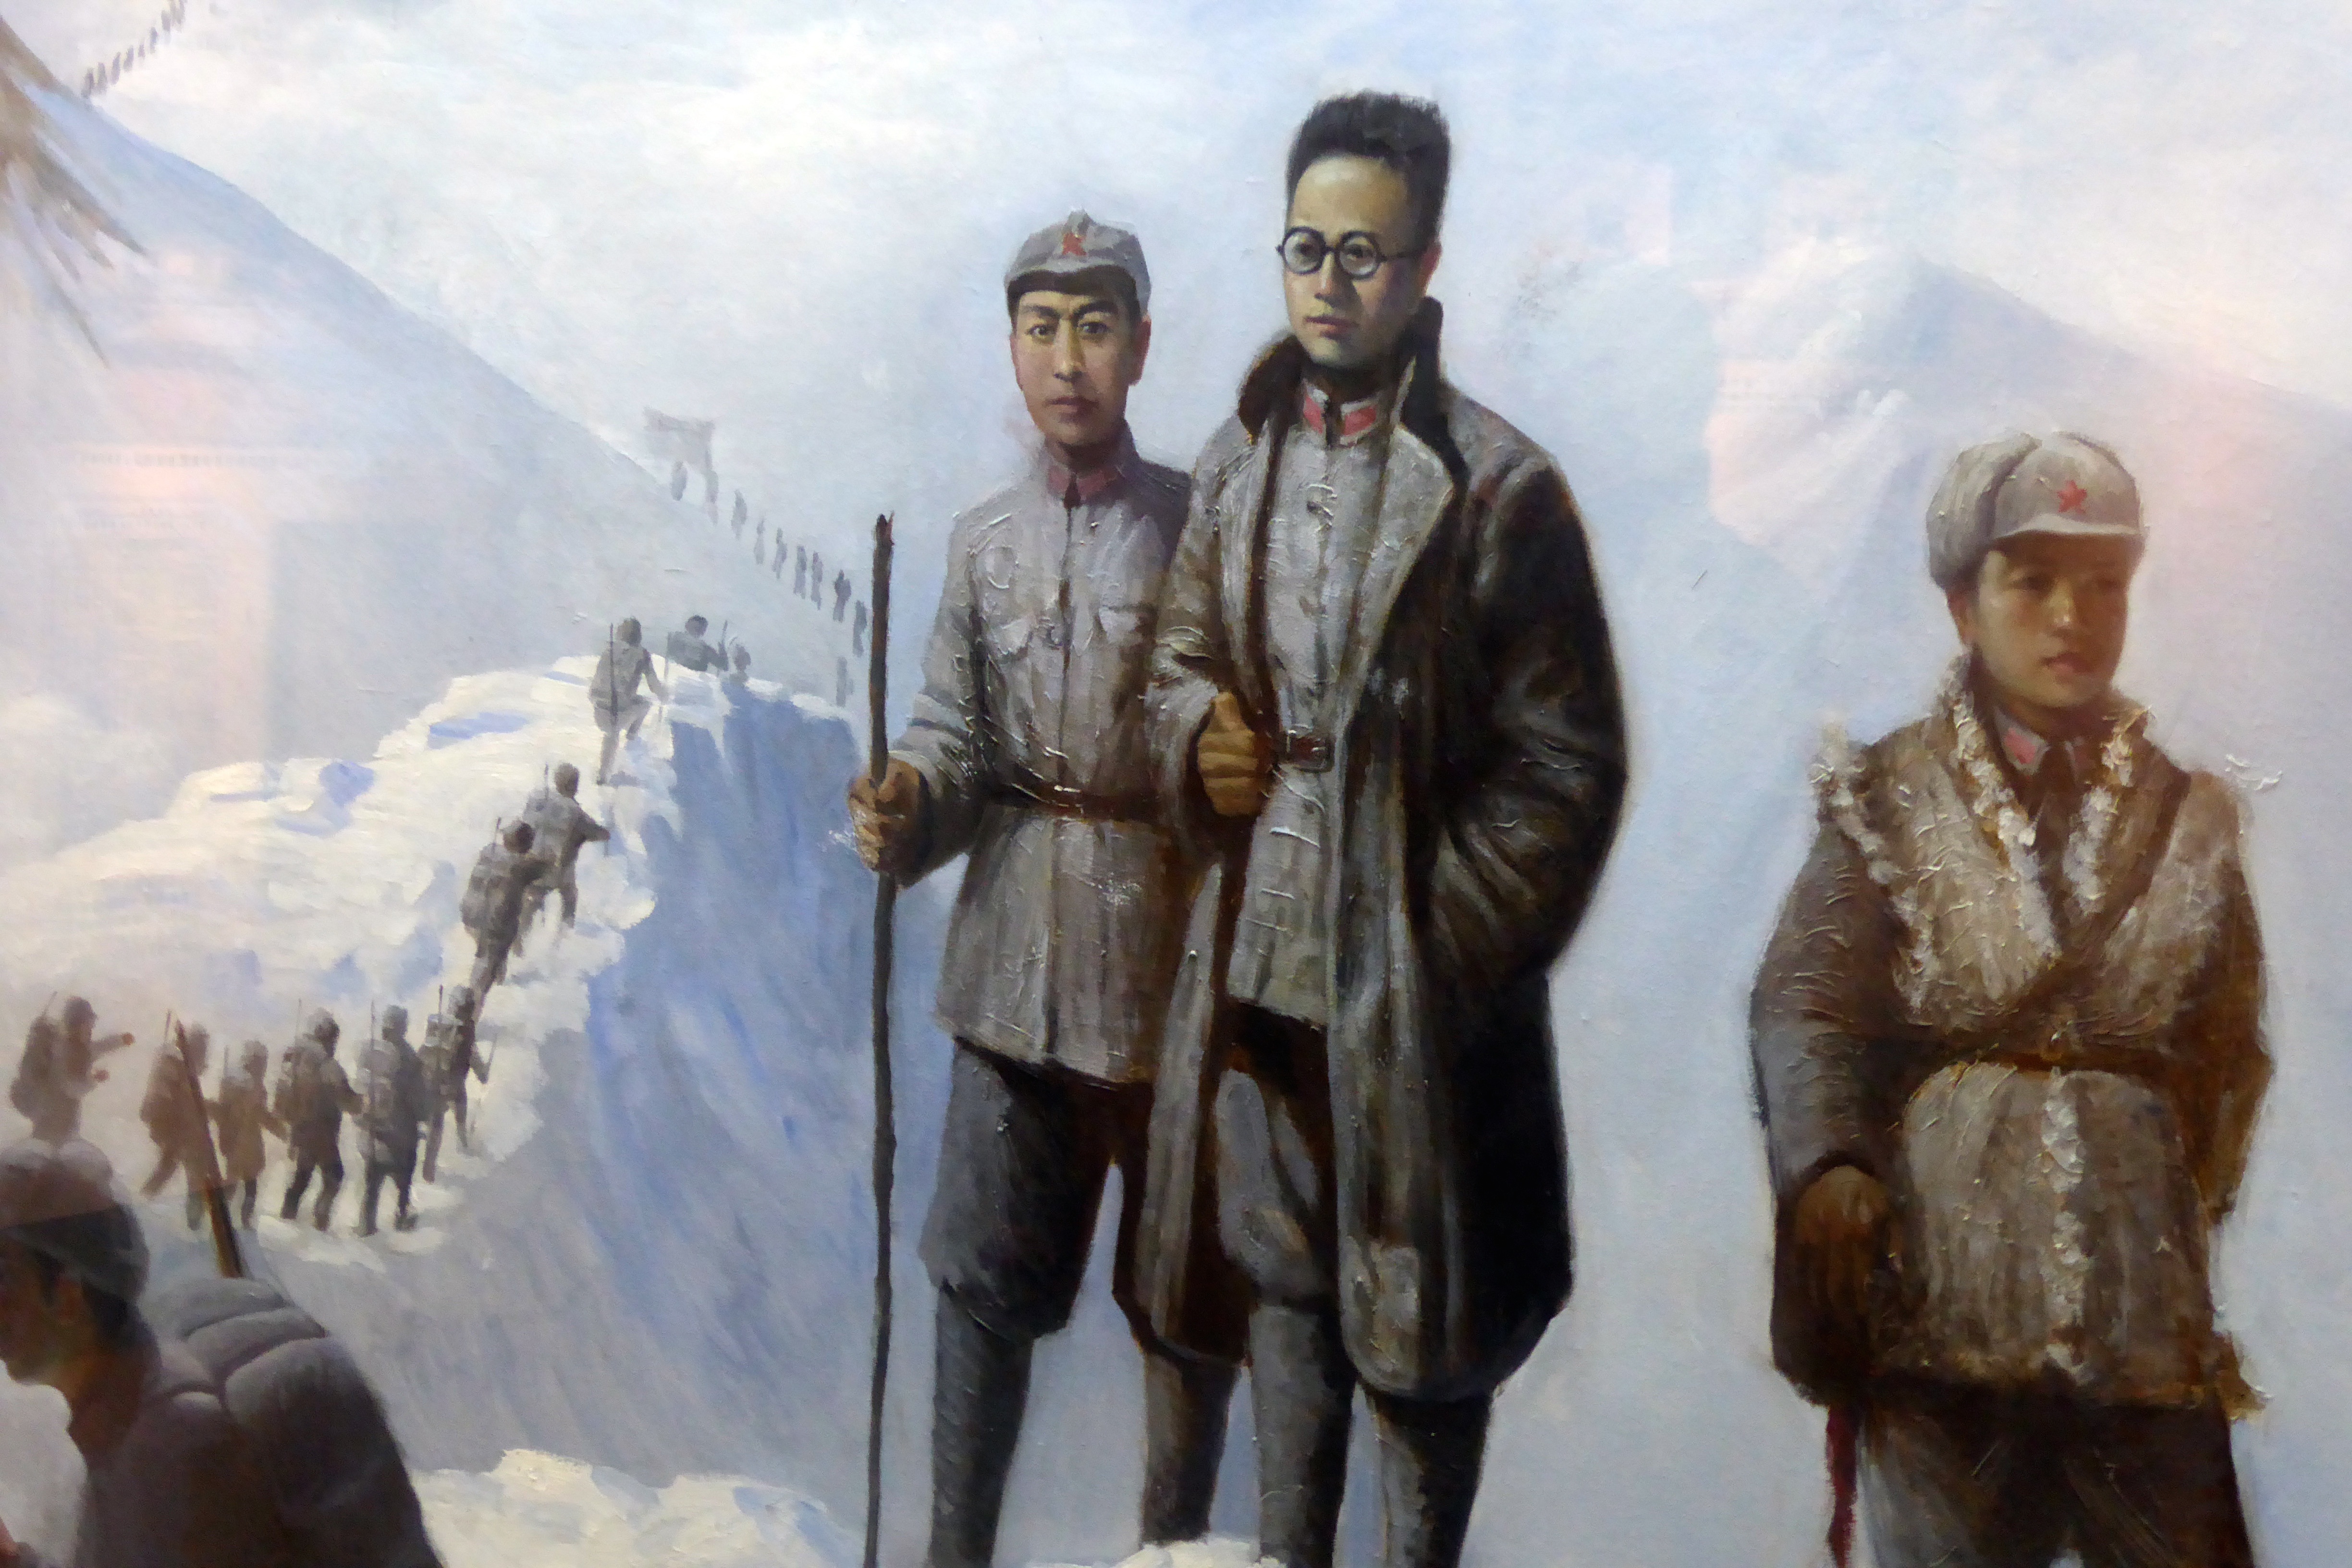 A Qin family descendant depicted in a painting of the Long march, Wuxi